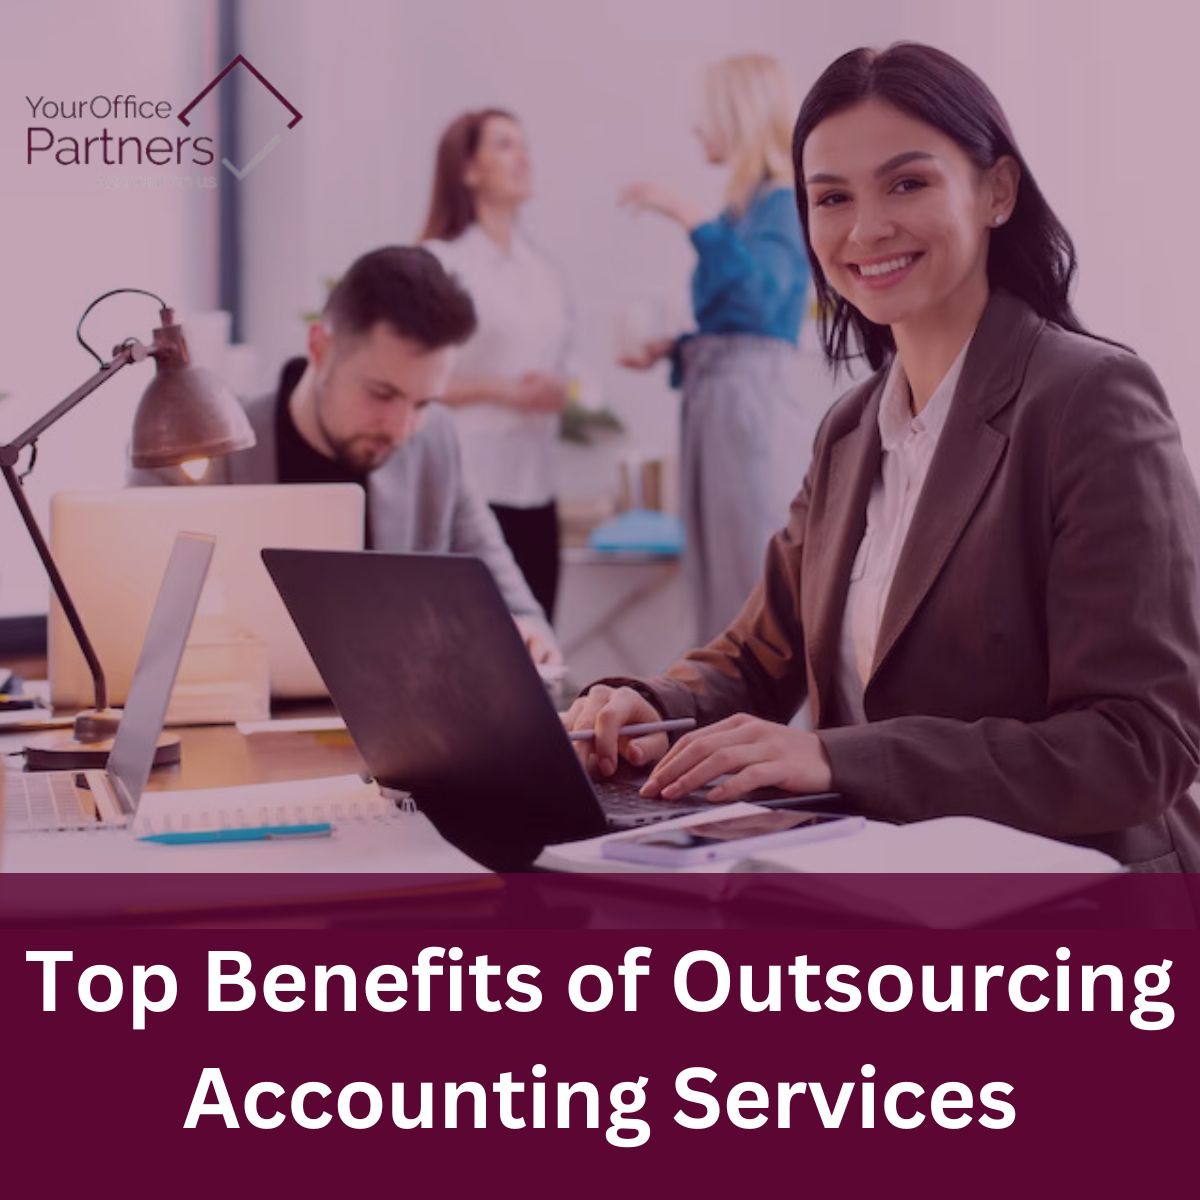 5 Top Benefits of Outsourcing Accounting Services in Dubai